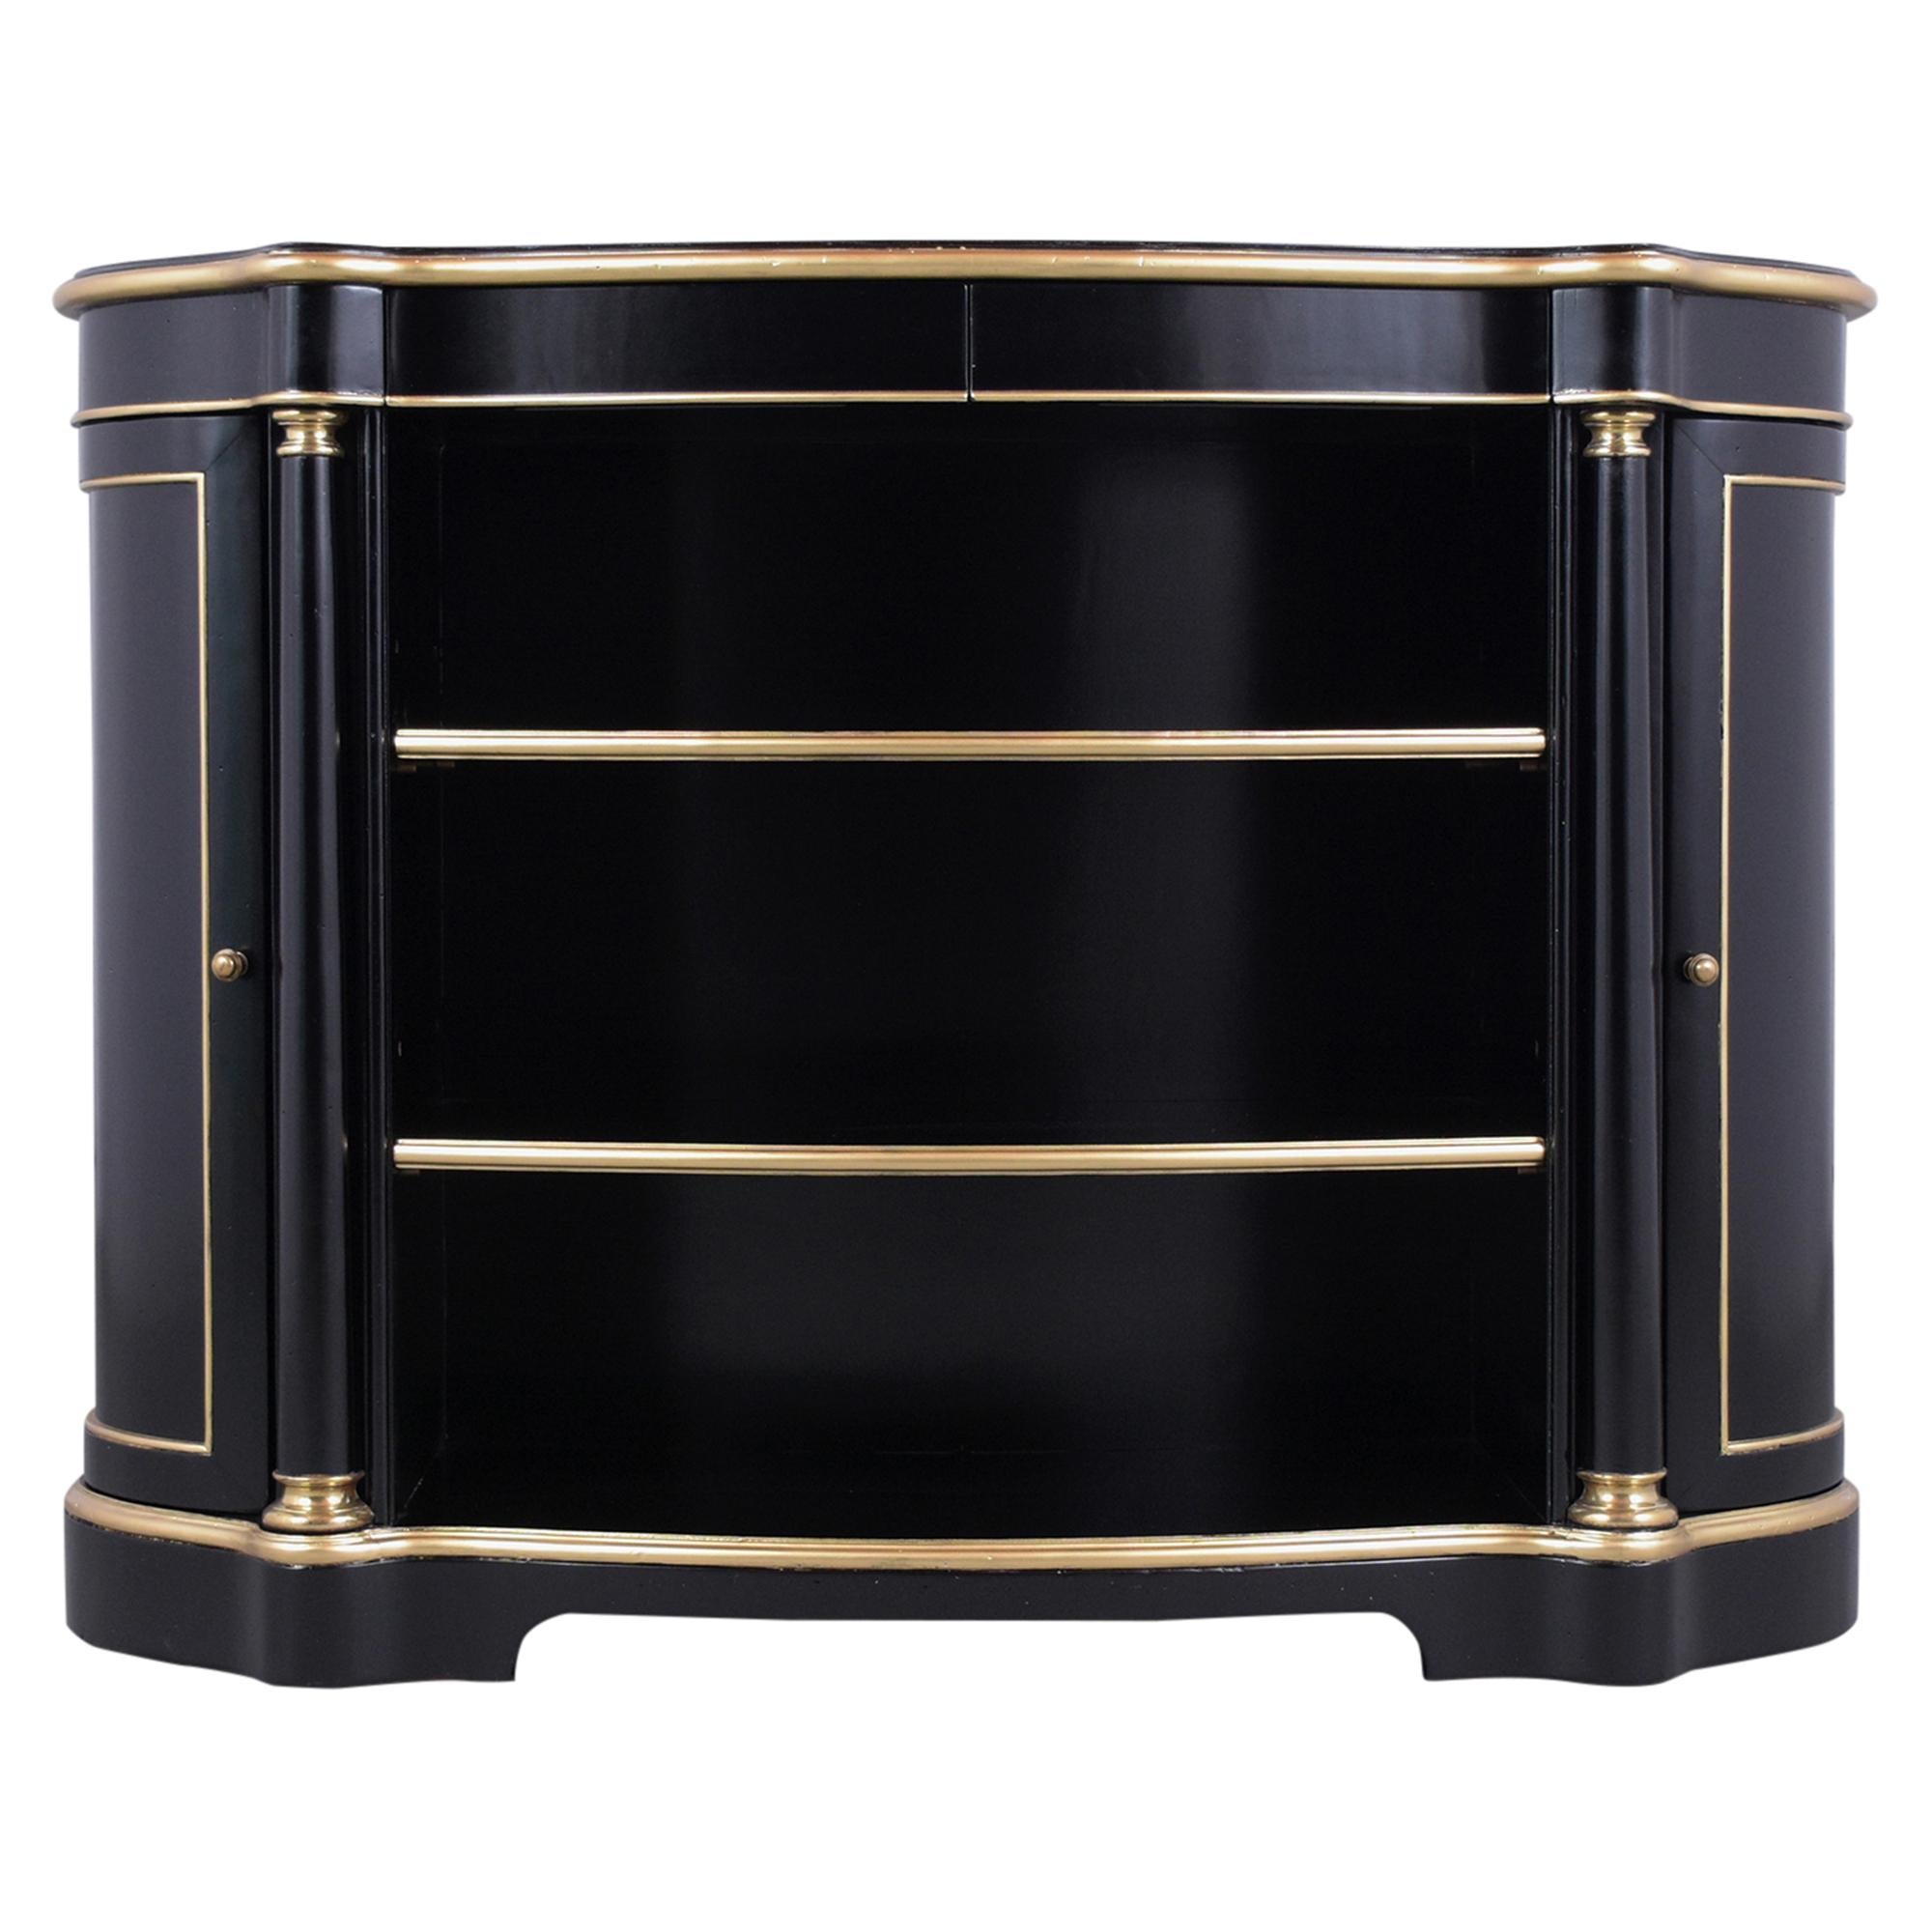 A remarkable empire-style bookshelf crafted out of mahogany wood that has been refinished in a newly ebonized color with elegant gilded molded accents and lacquer finish. This cabinet has been professionally restored comes with two center columns